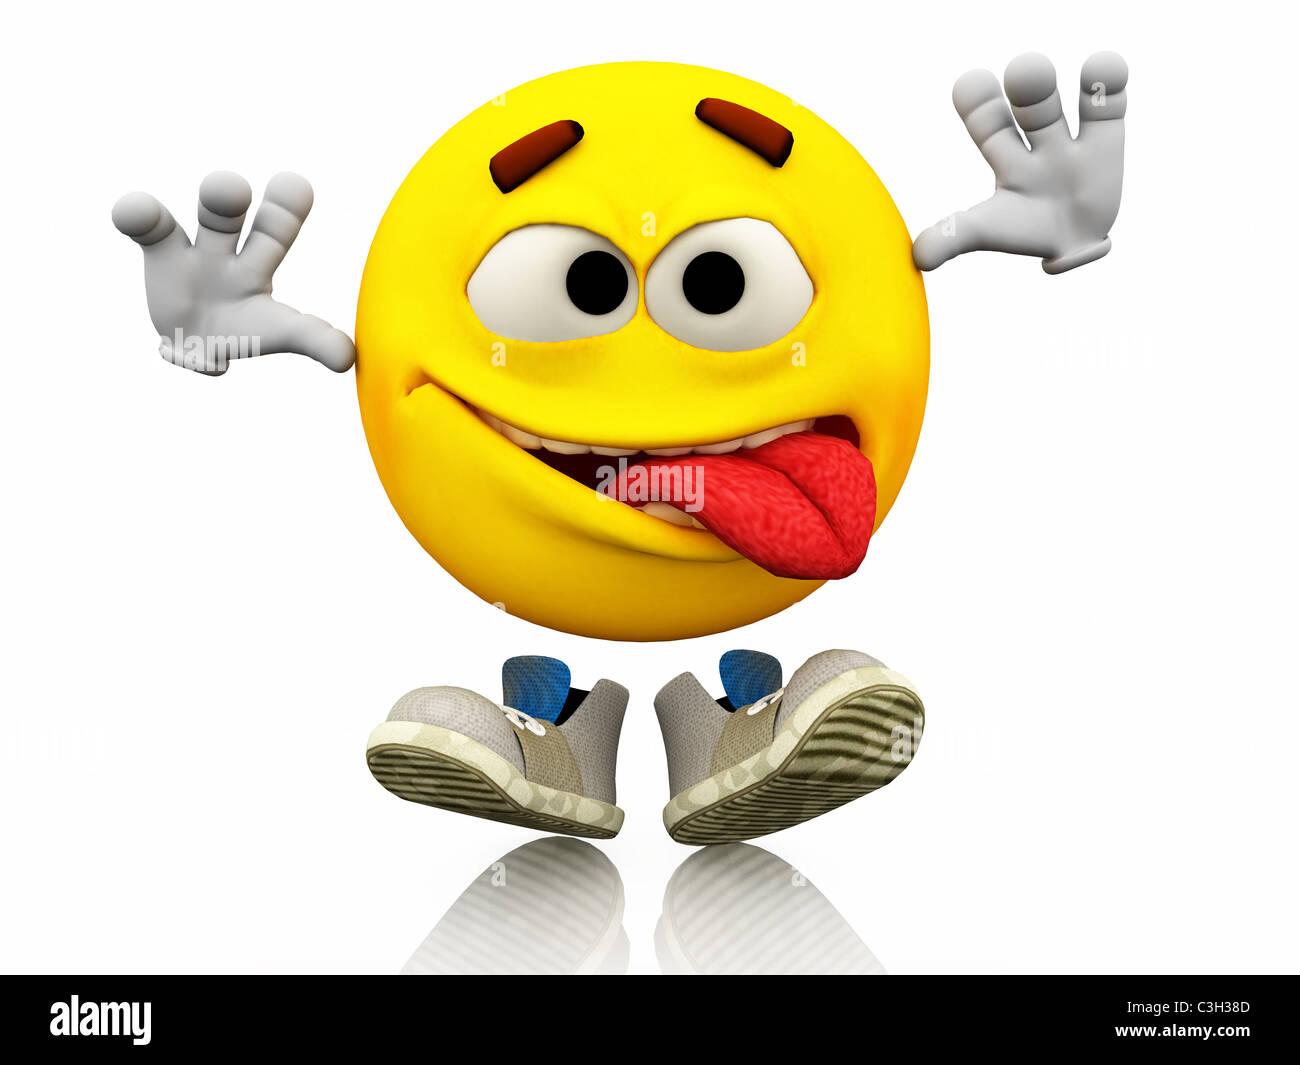 Smiley, Emoticon. Facial expression.  Emotional tongue out expression on a yellow face with large eyes with shoes. Happy. Stock Photo